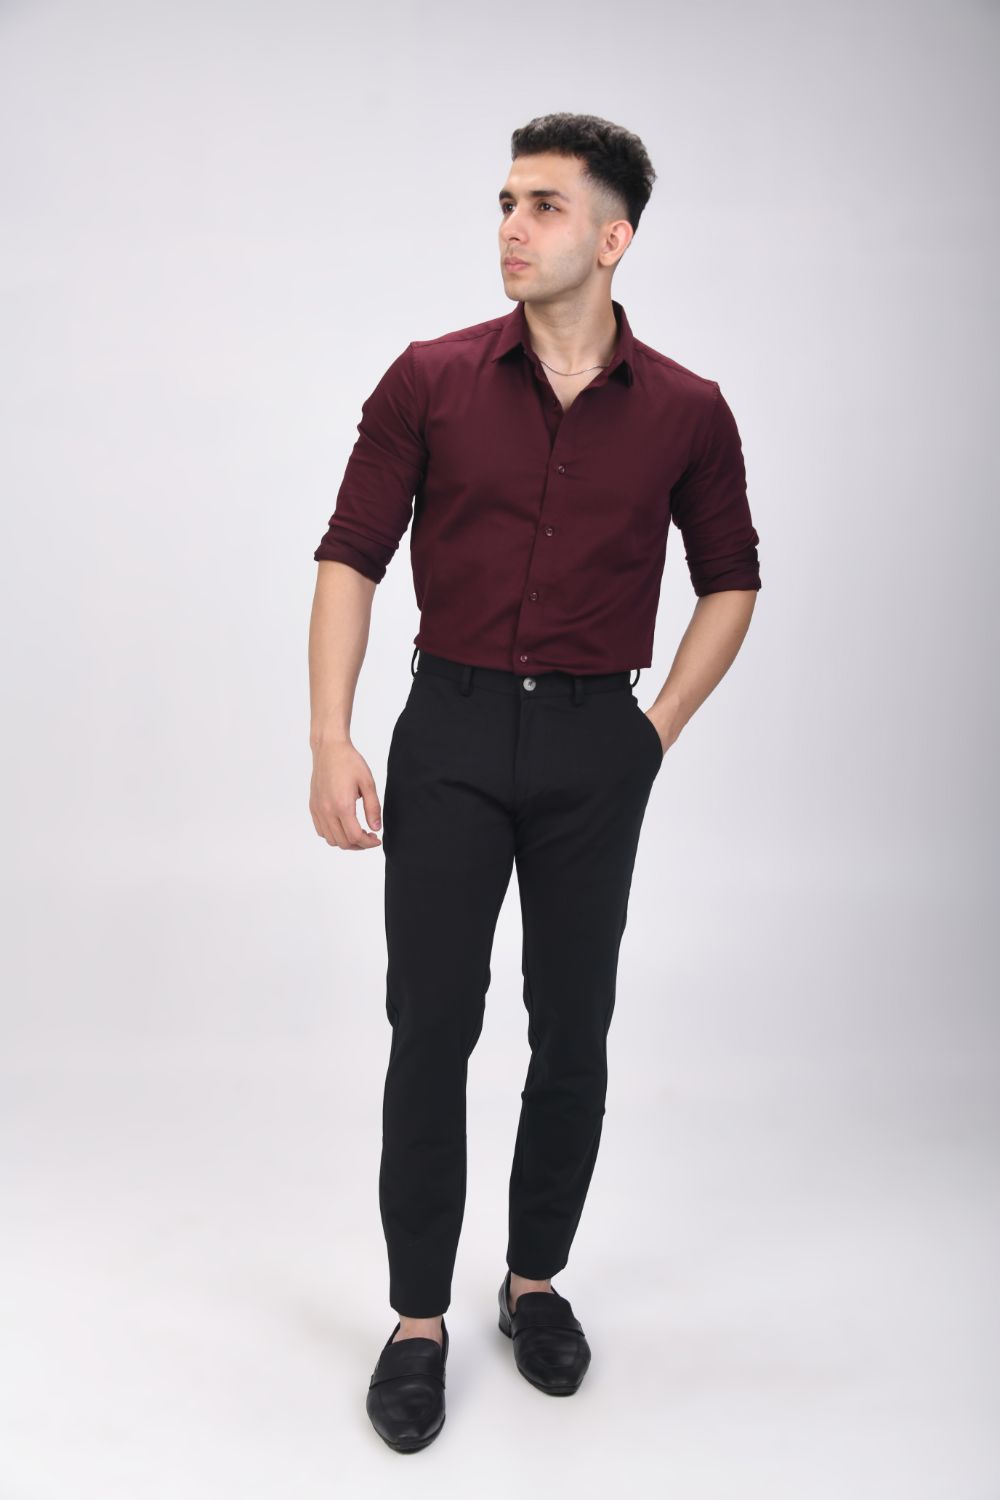 DK FASHION Men Solid Casual Maroon Shirt - Buy DK FASHION Men Solid Casual Maroon  Shirt Online at Best Prices in India | Flipkart.com